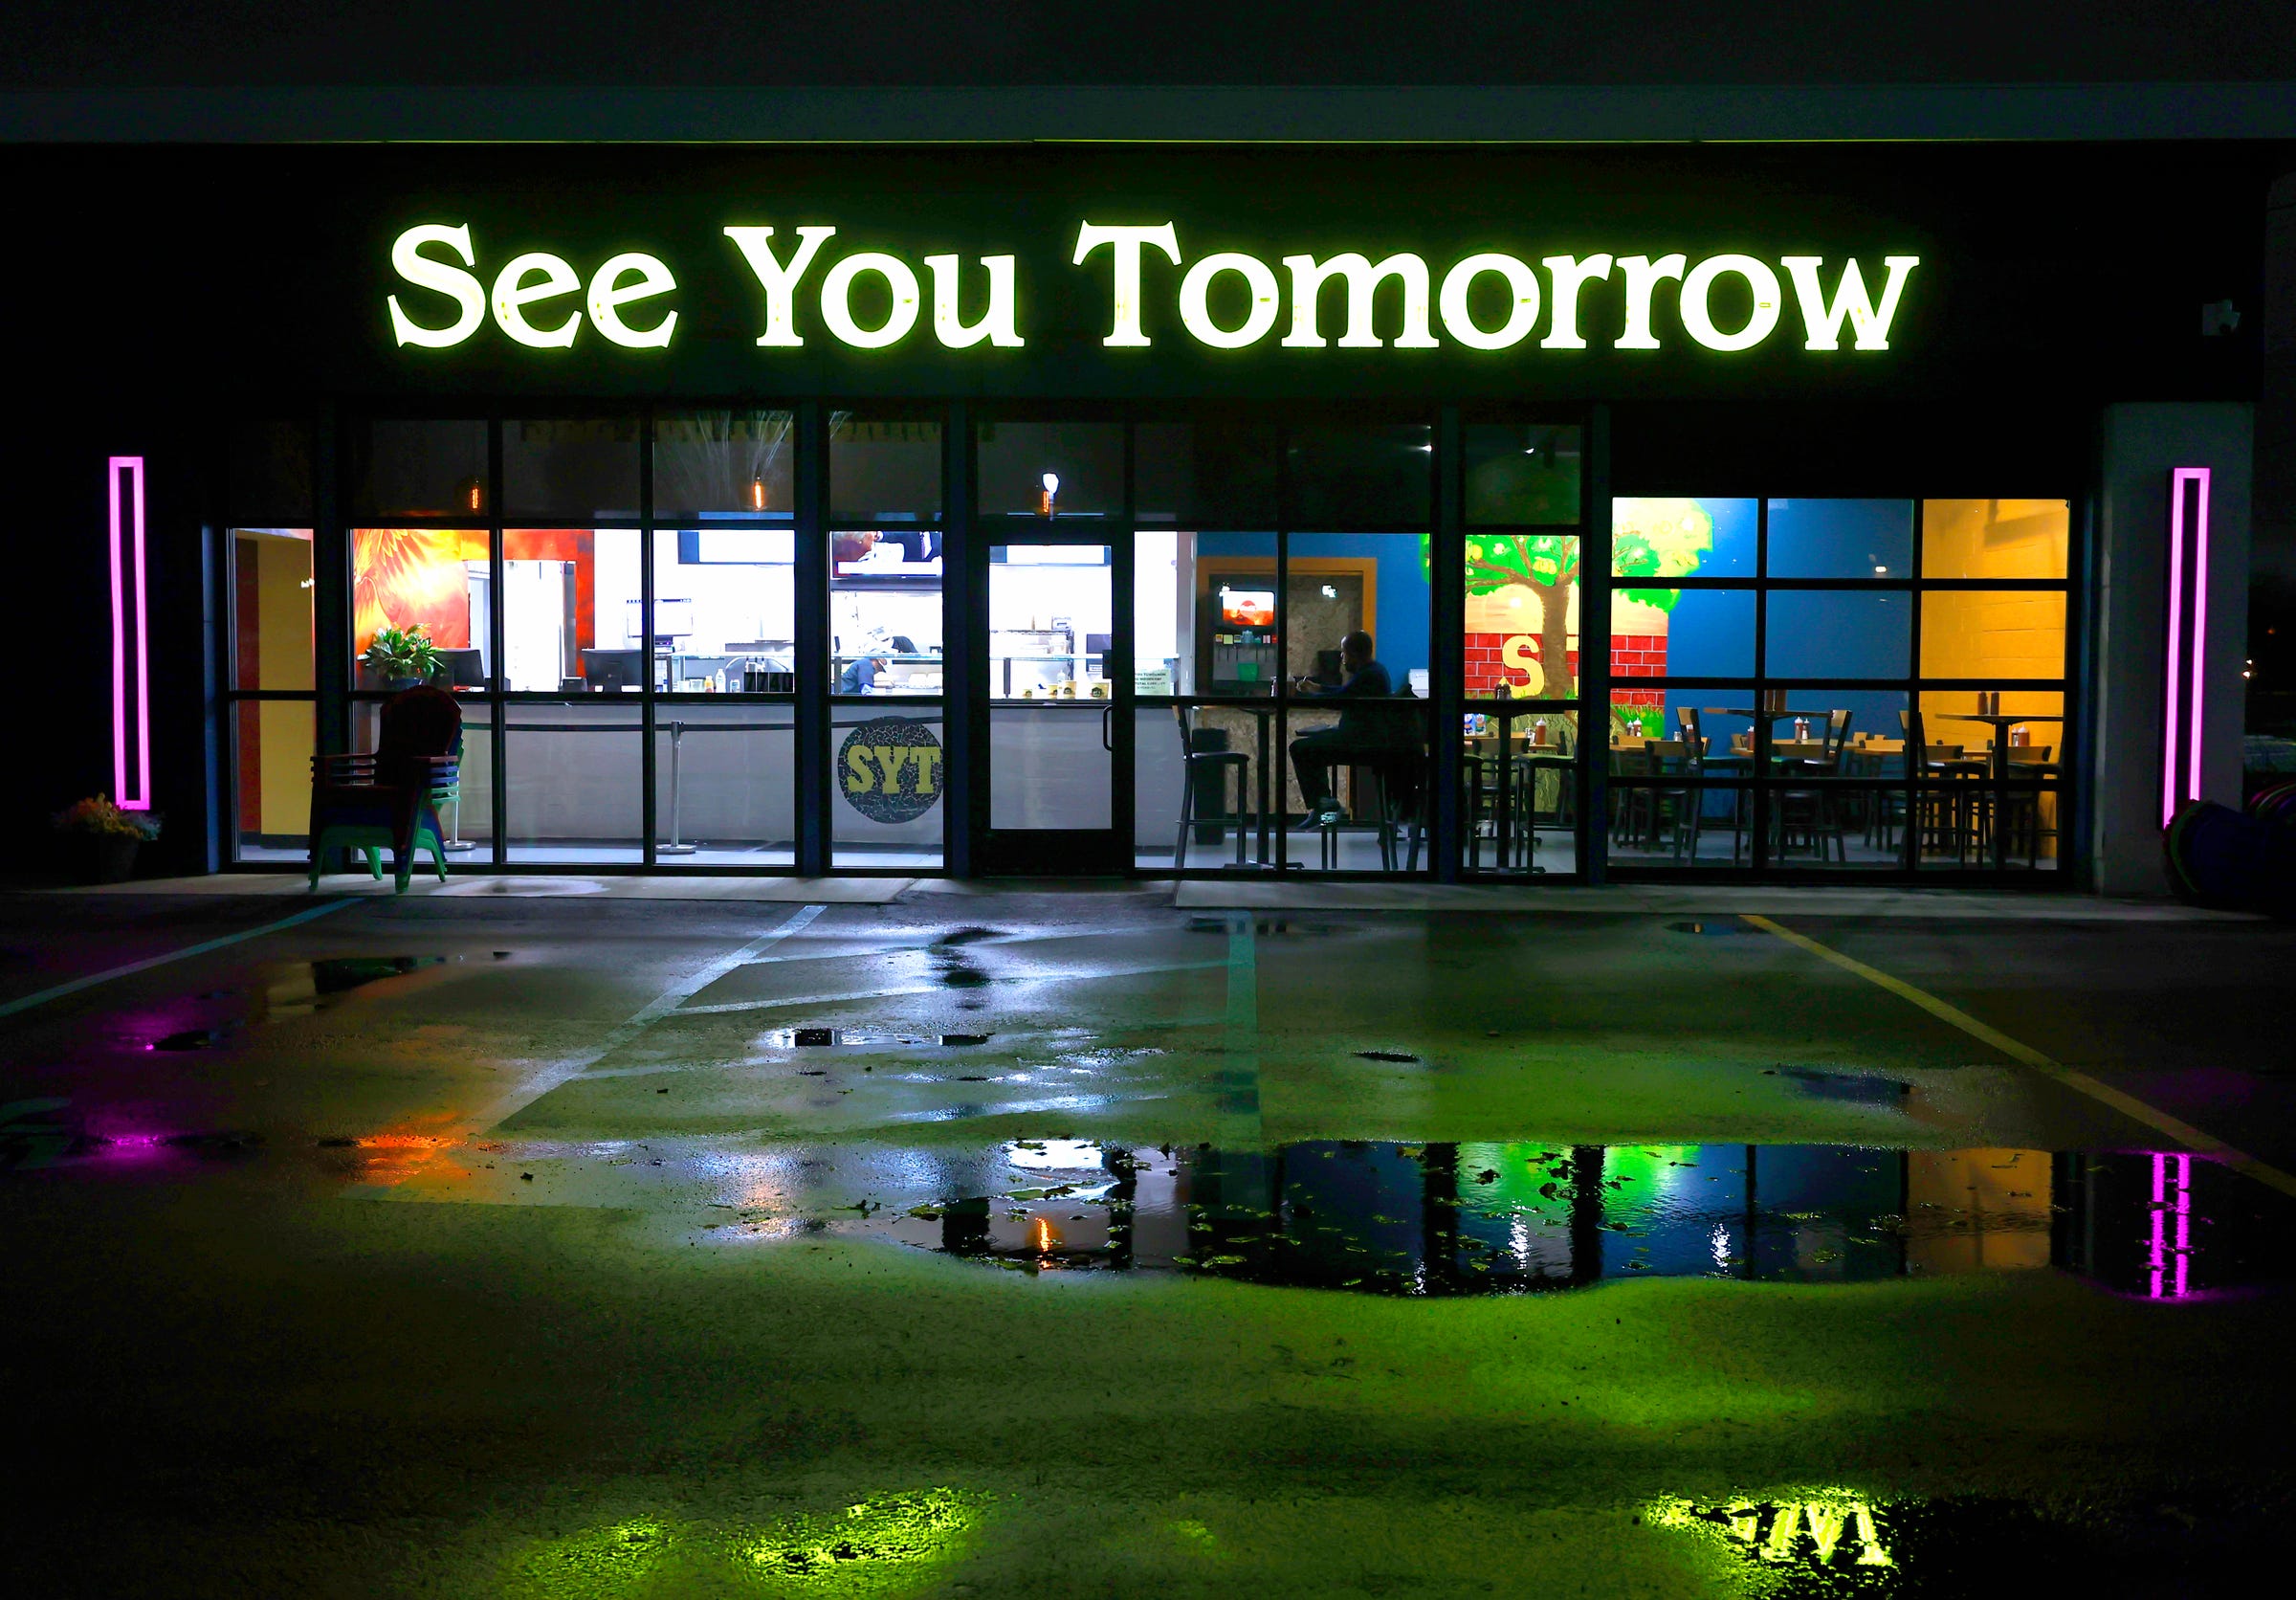 See You Tomorrow cafe before it opens at 8 am on Wednesday, Nov 30, 2022.
Damon Cann is the kitchen manager here. He was a cook at a Birmingham restaurant but after disagreements with his boss there he left to work at this restaurant not far from where he grew up.